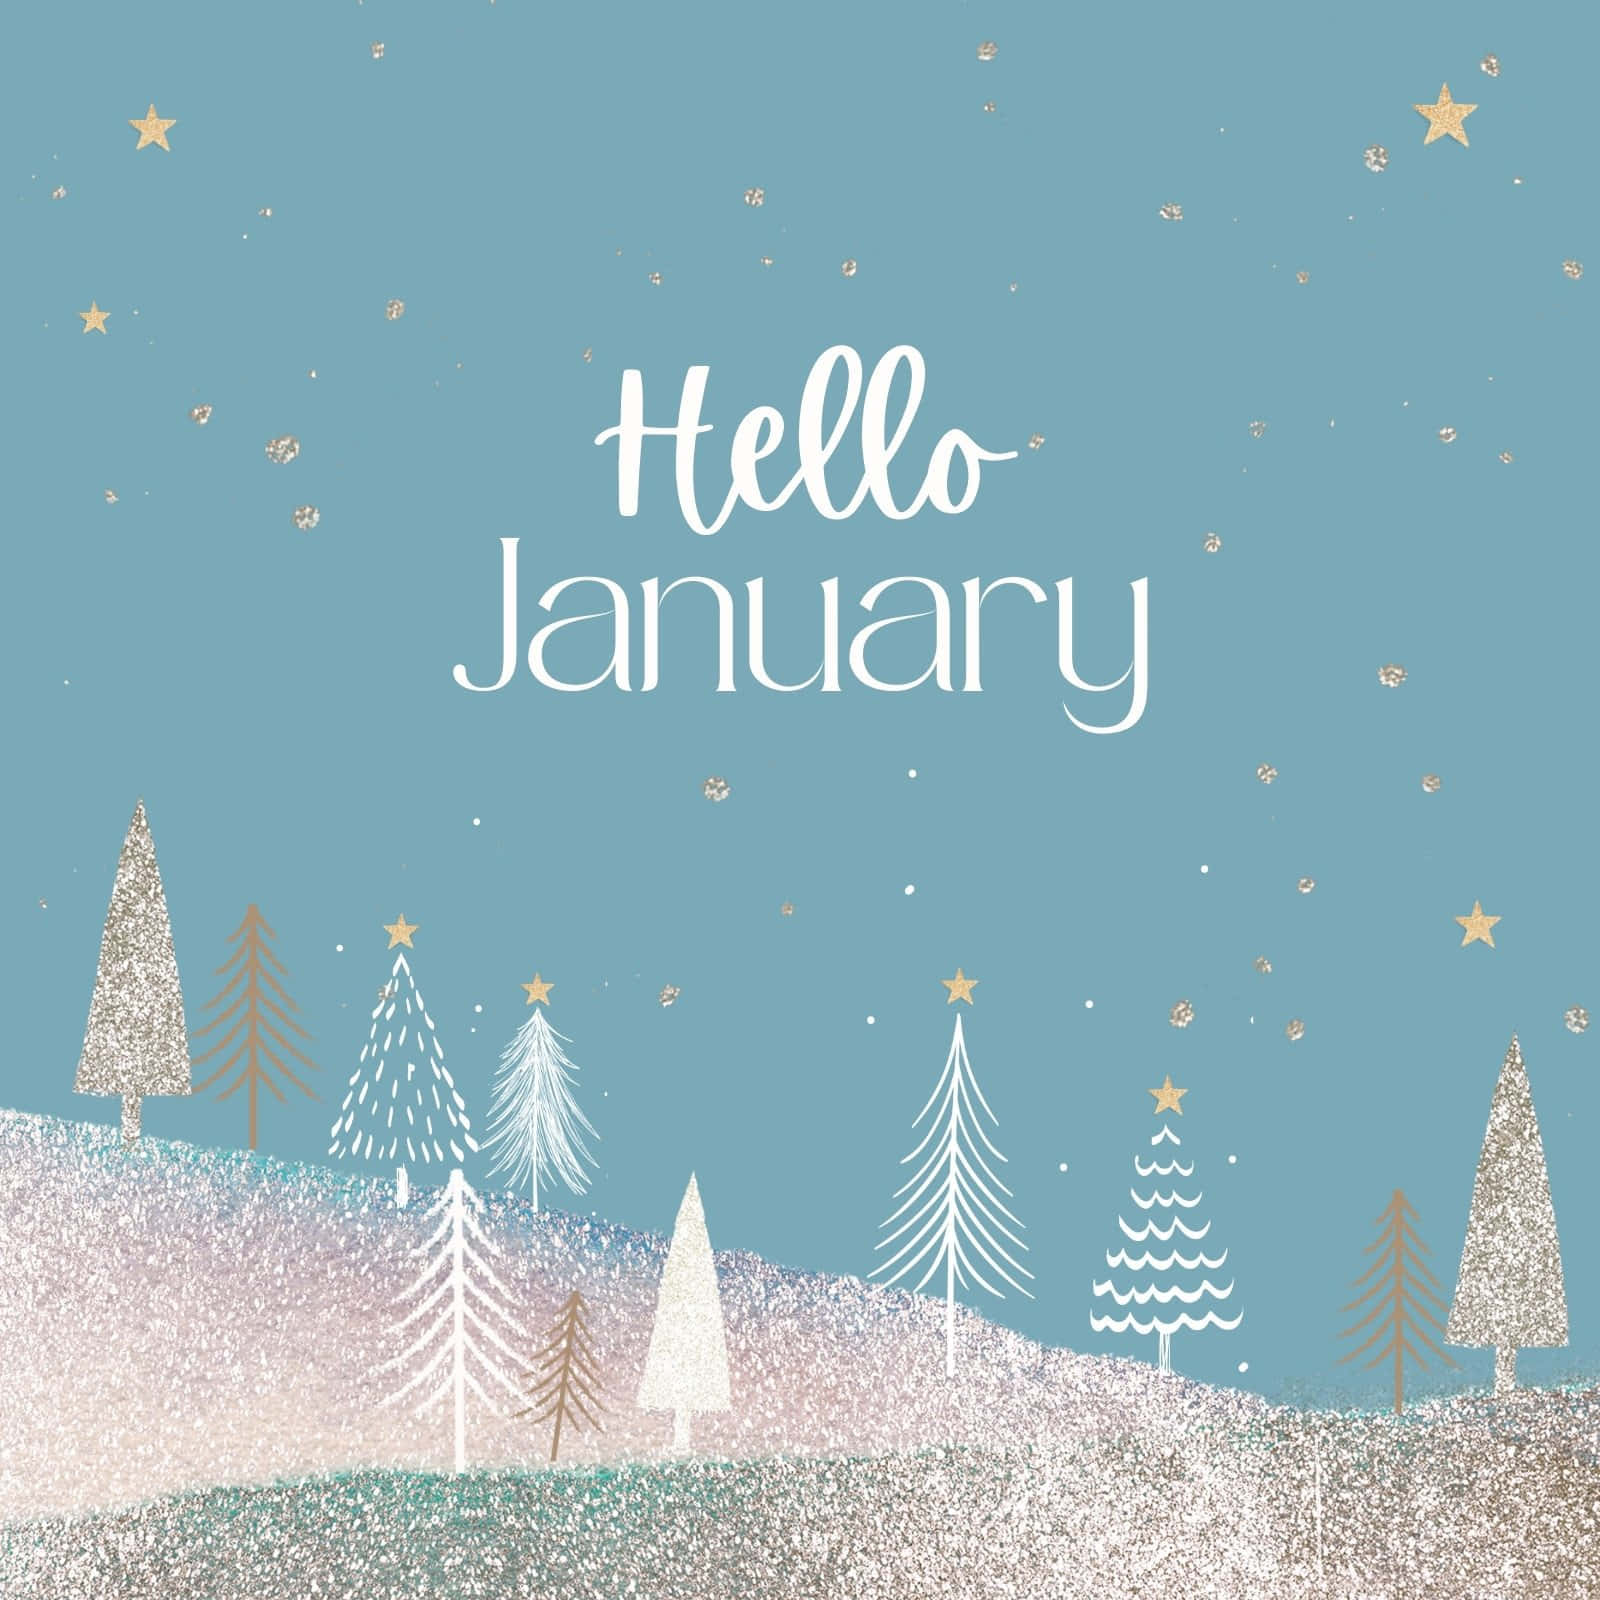 "Welcome January!" Wallpaper